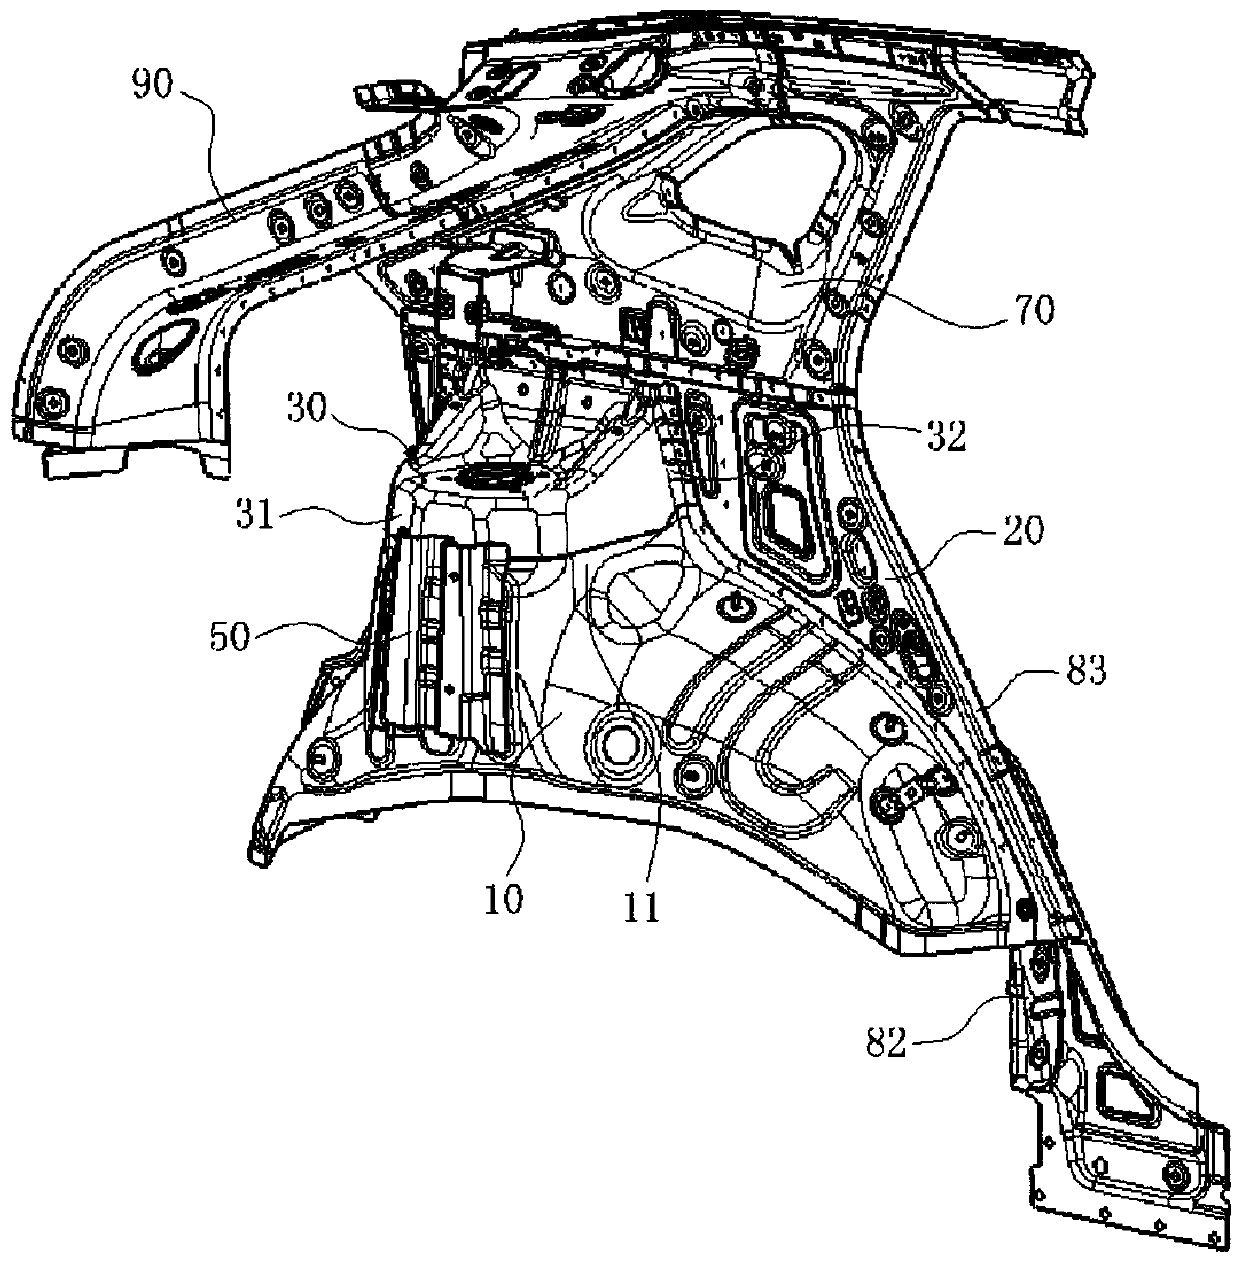 Vehicle body rear structure and automobile